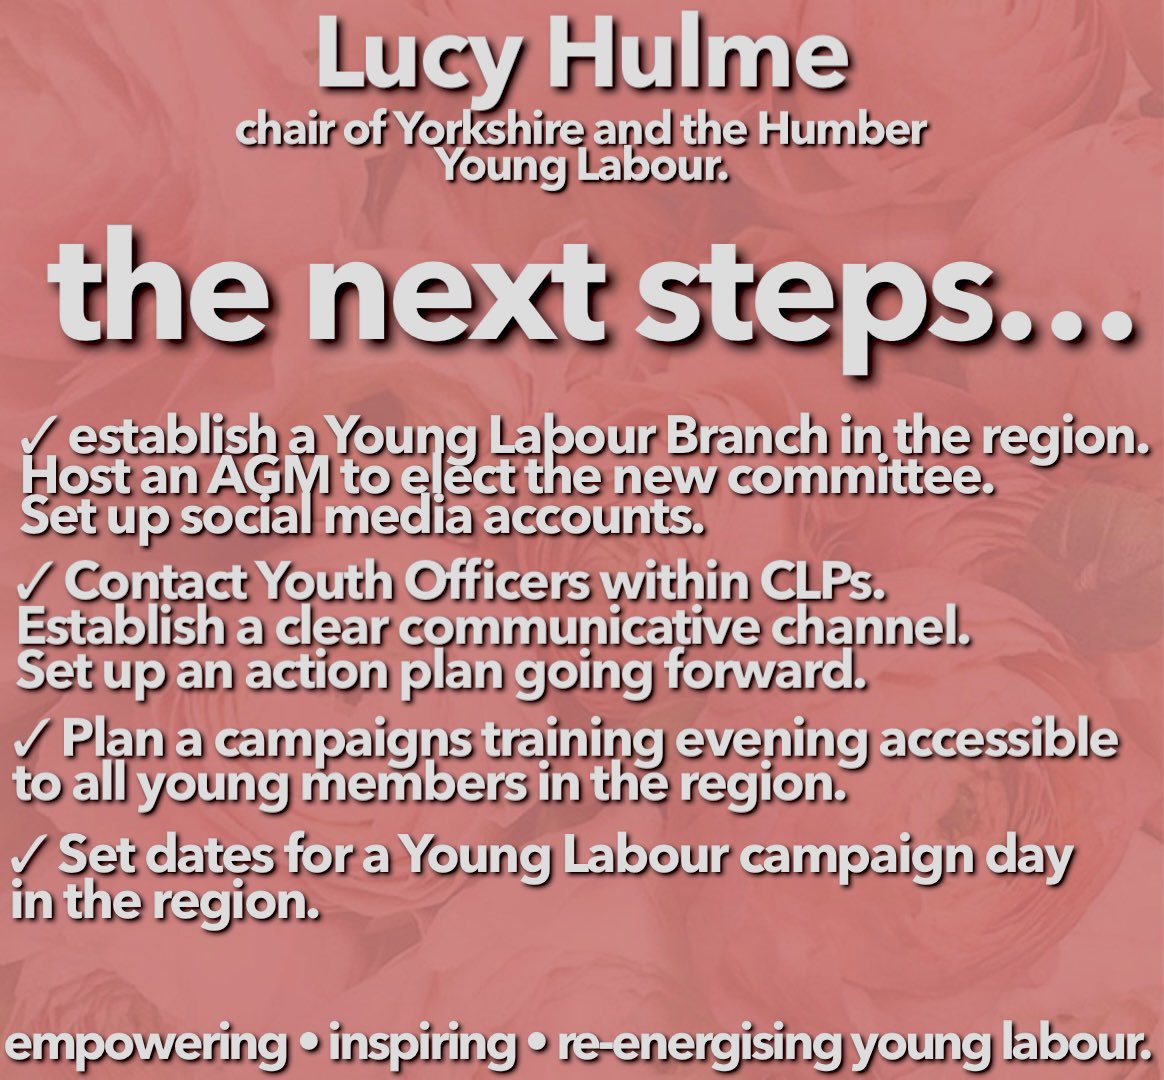 The next steps for Young Labour in Yorkshire and the Humber. I want to ensure that members are regularly updated on the work being undertaken by their representatives. Work is going on behind the scenes to ensure that my pledges become a reality. Excited to get started🌹